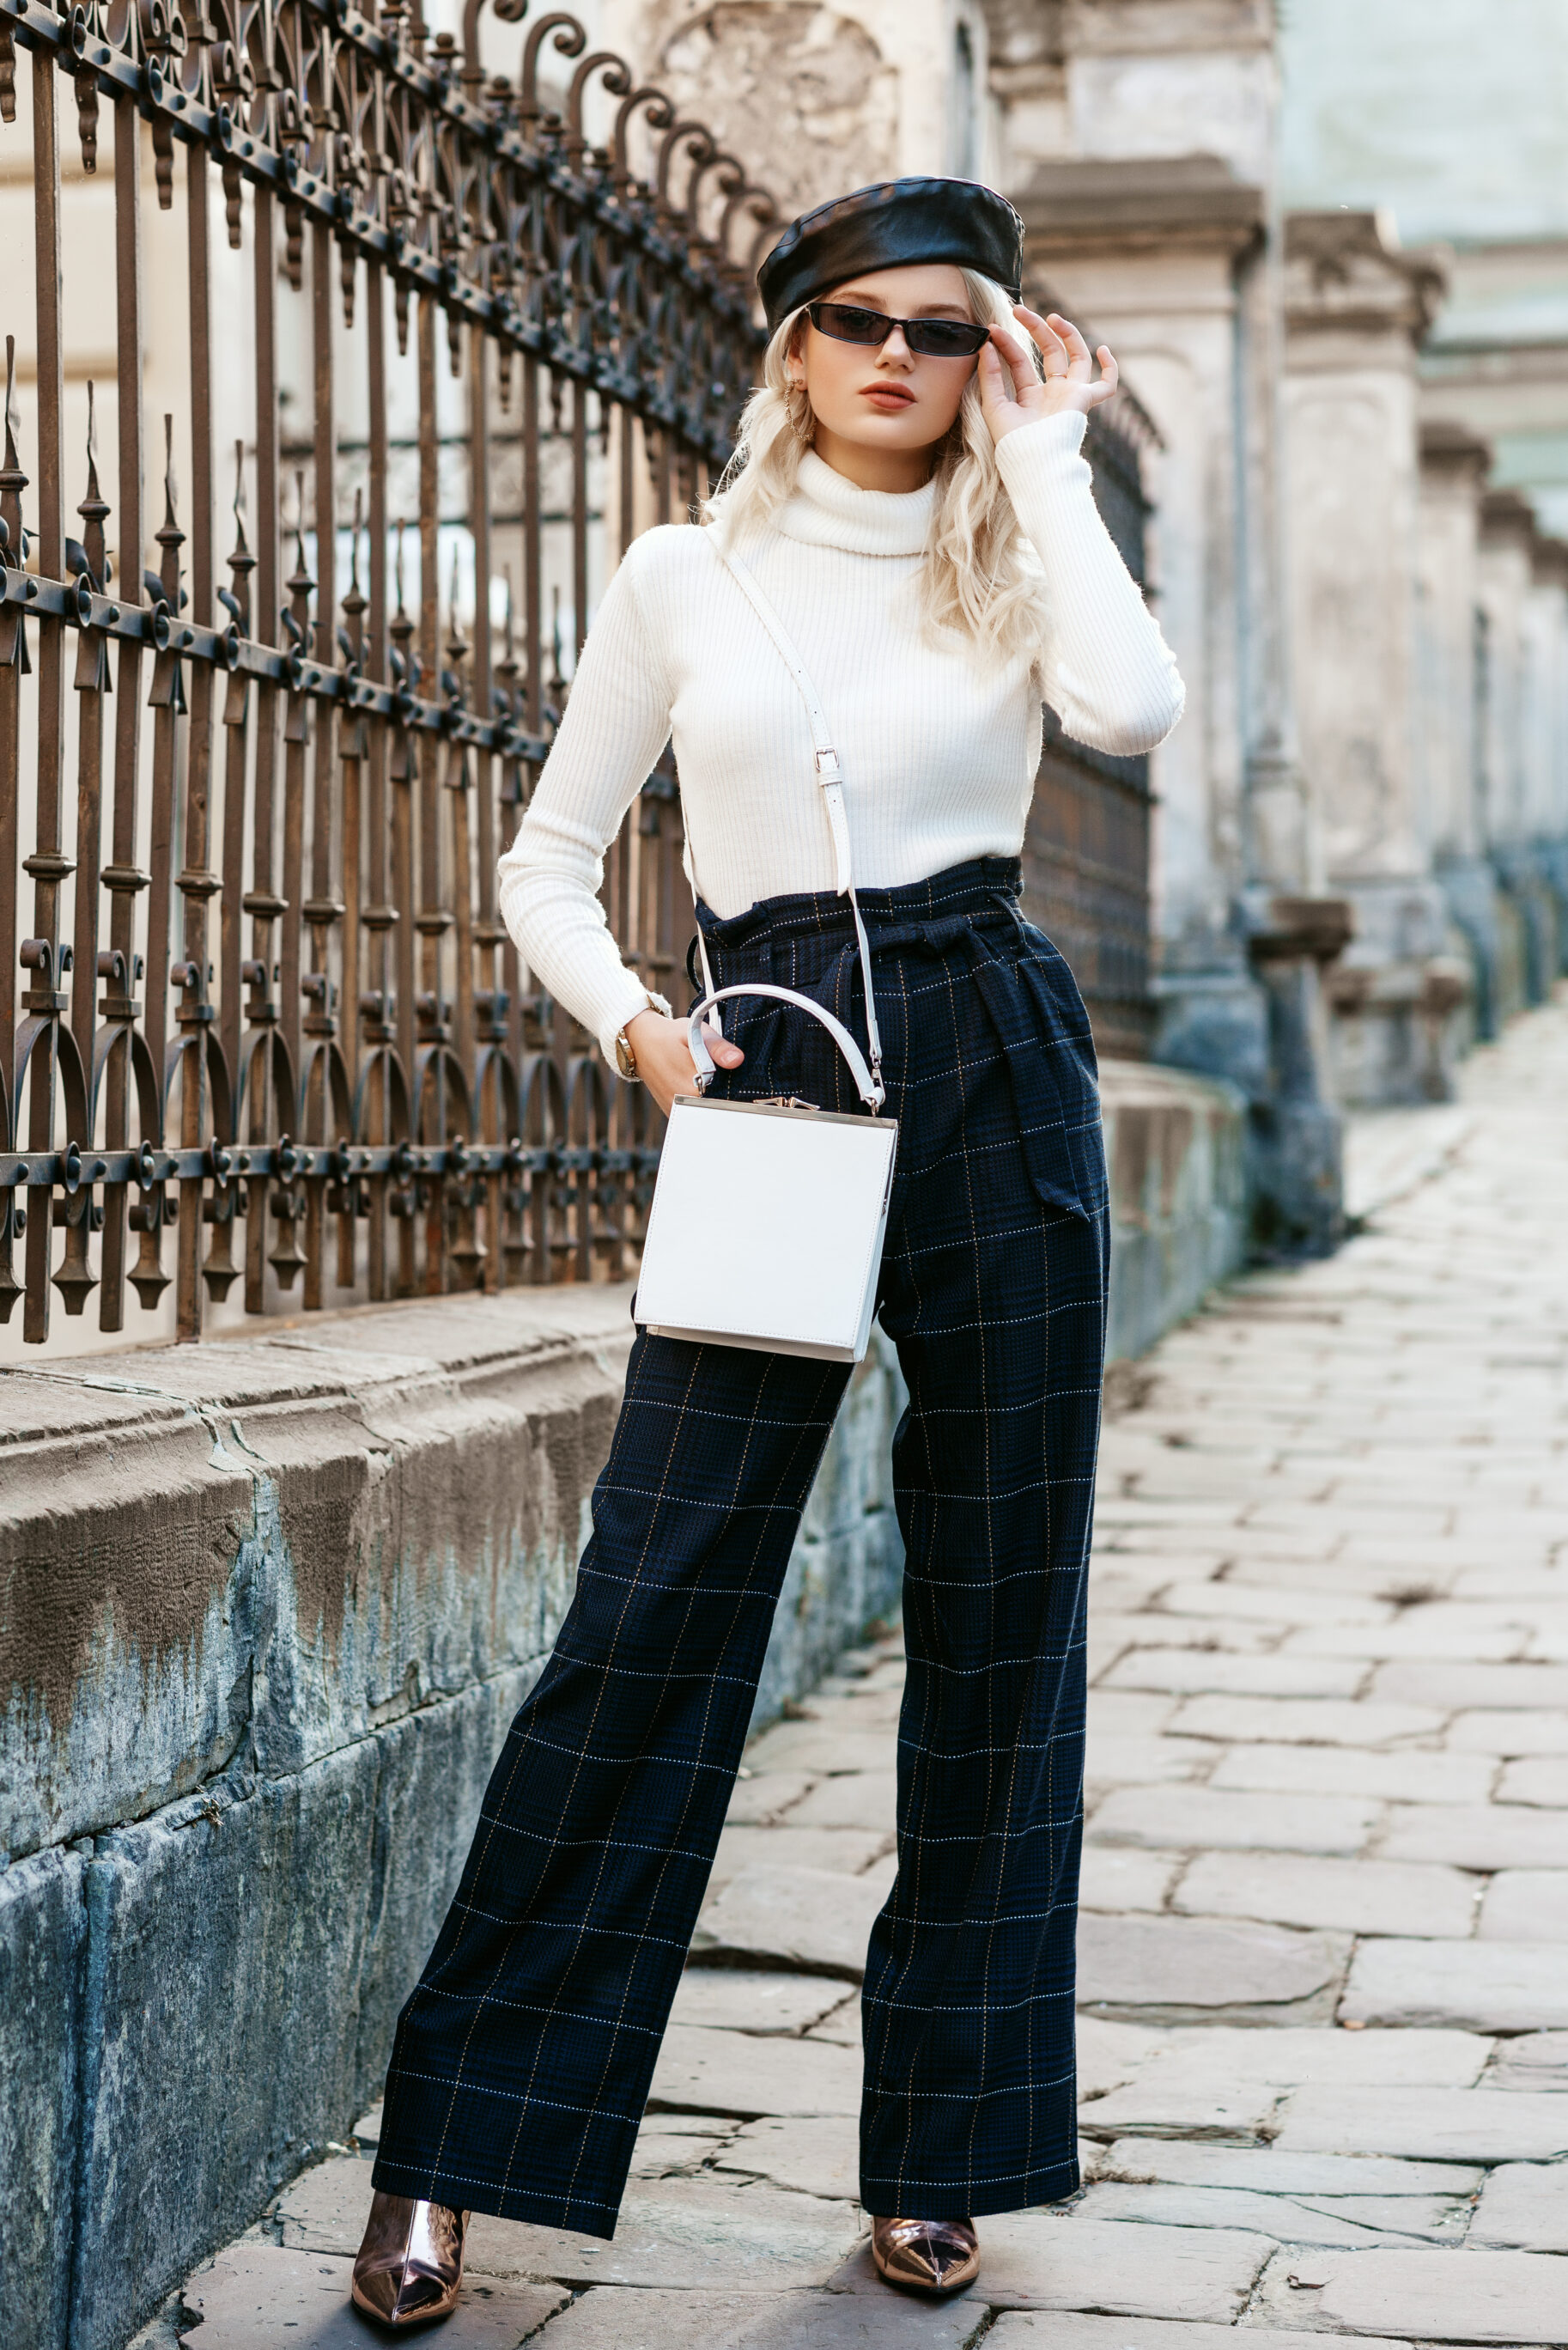 Black Leather Beret, Sunglasses, White Turtleneck Sweater, Checked High Waist Pants, With A Small Bag